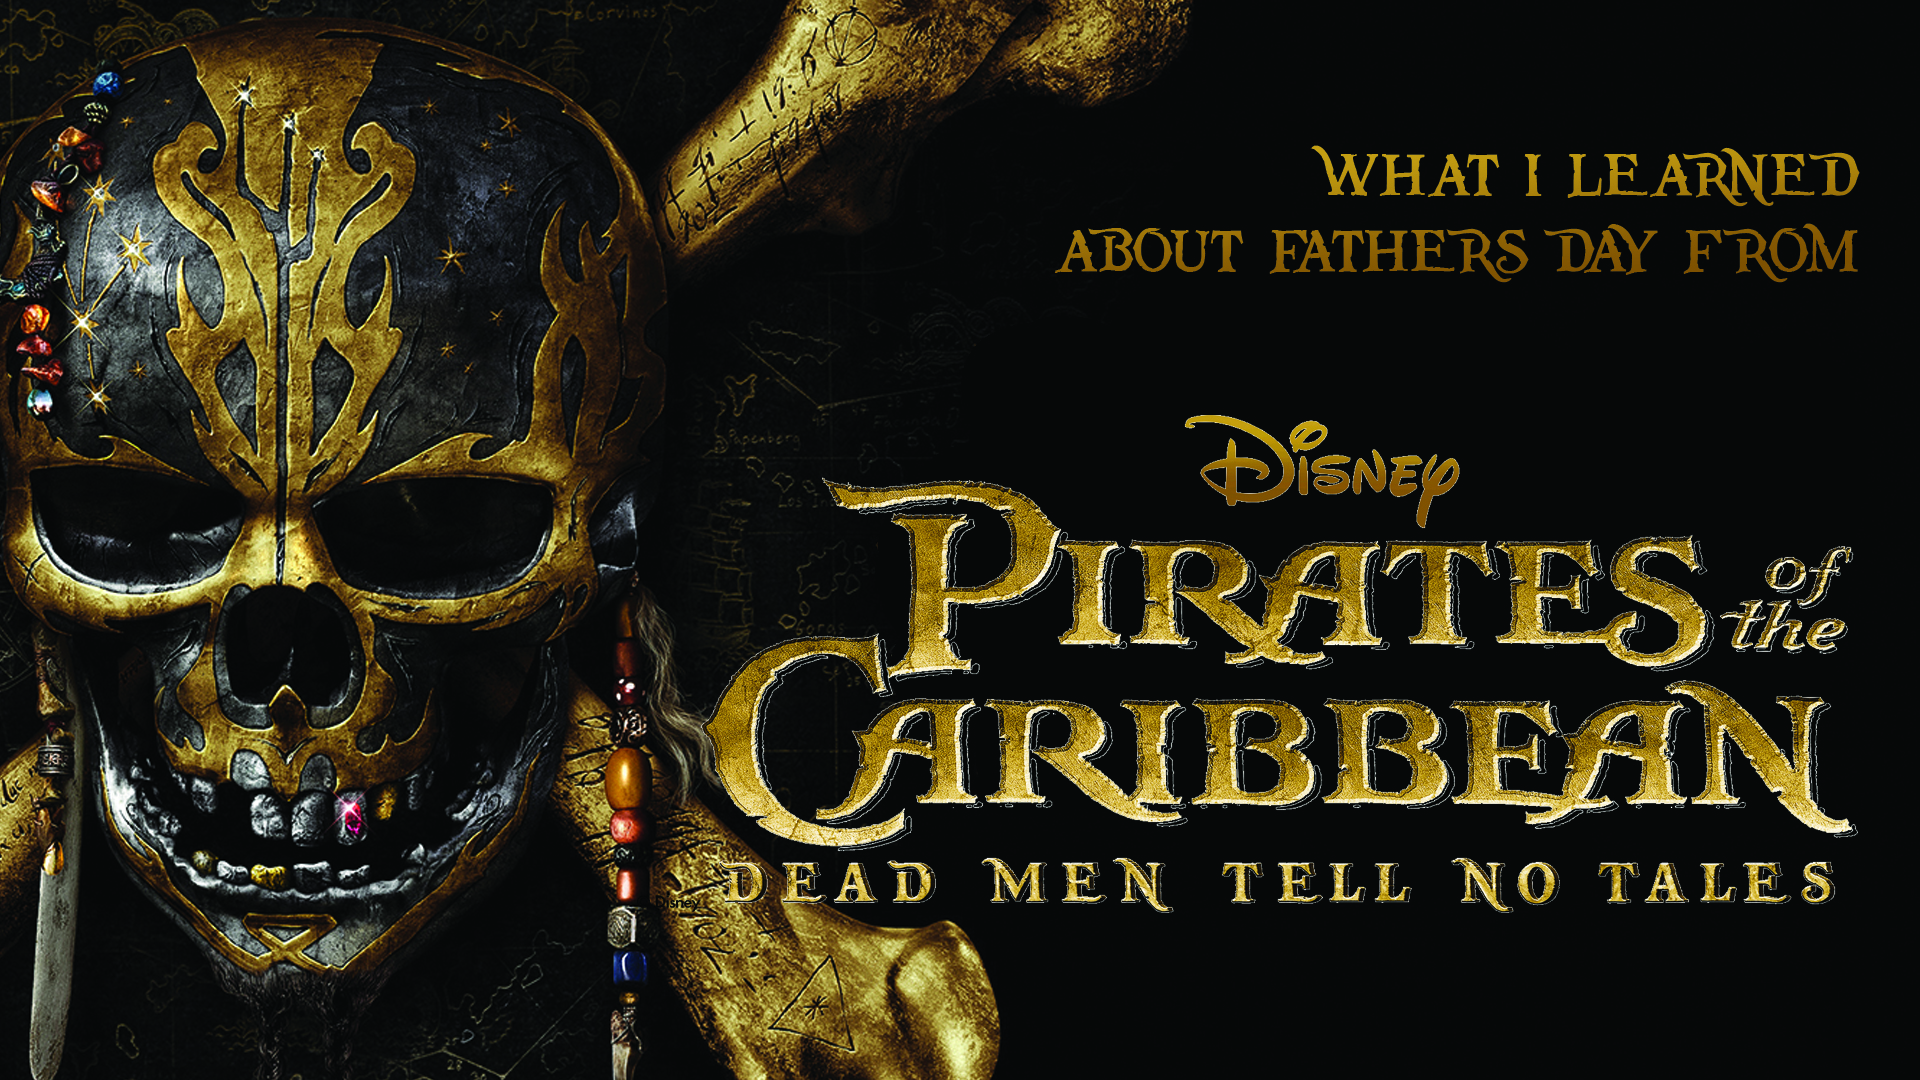 Pirates of the Caribbean blog post by Coppelia